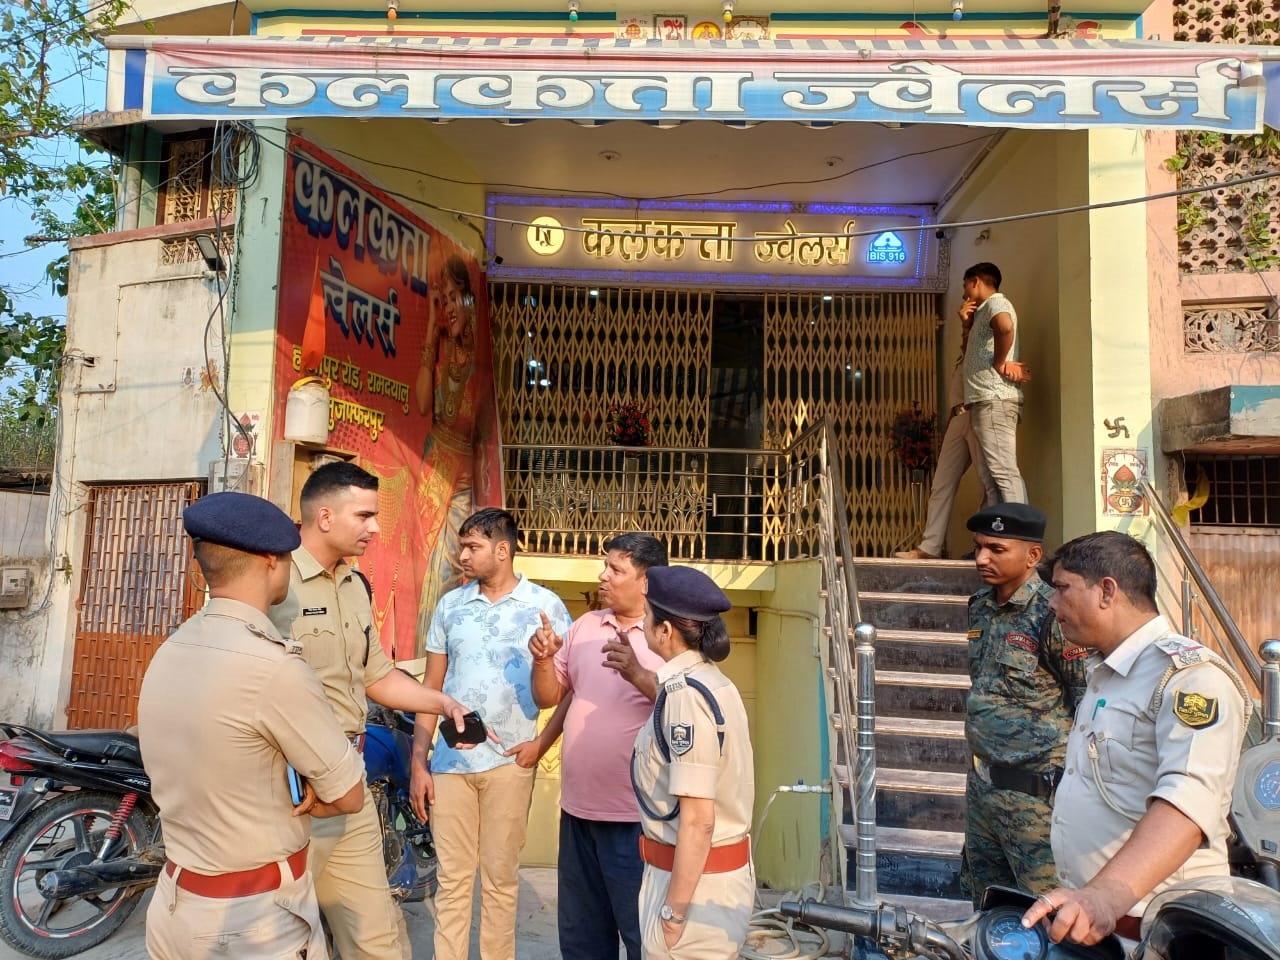 Crime News Jewelery worth Rs 51 lakh looted from jewelery shop in Muzaffarpur